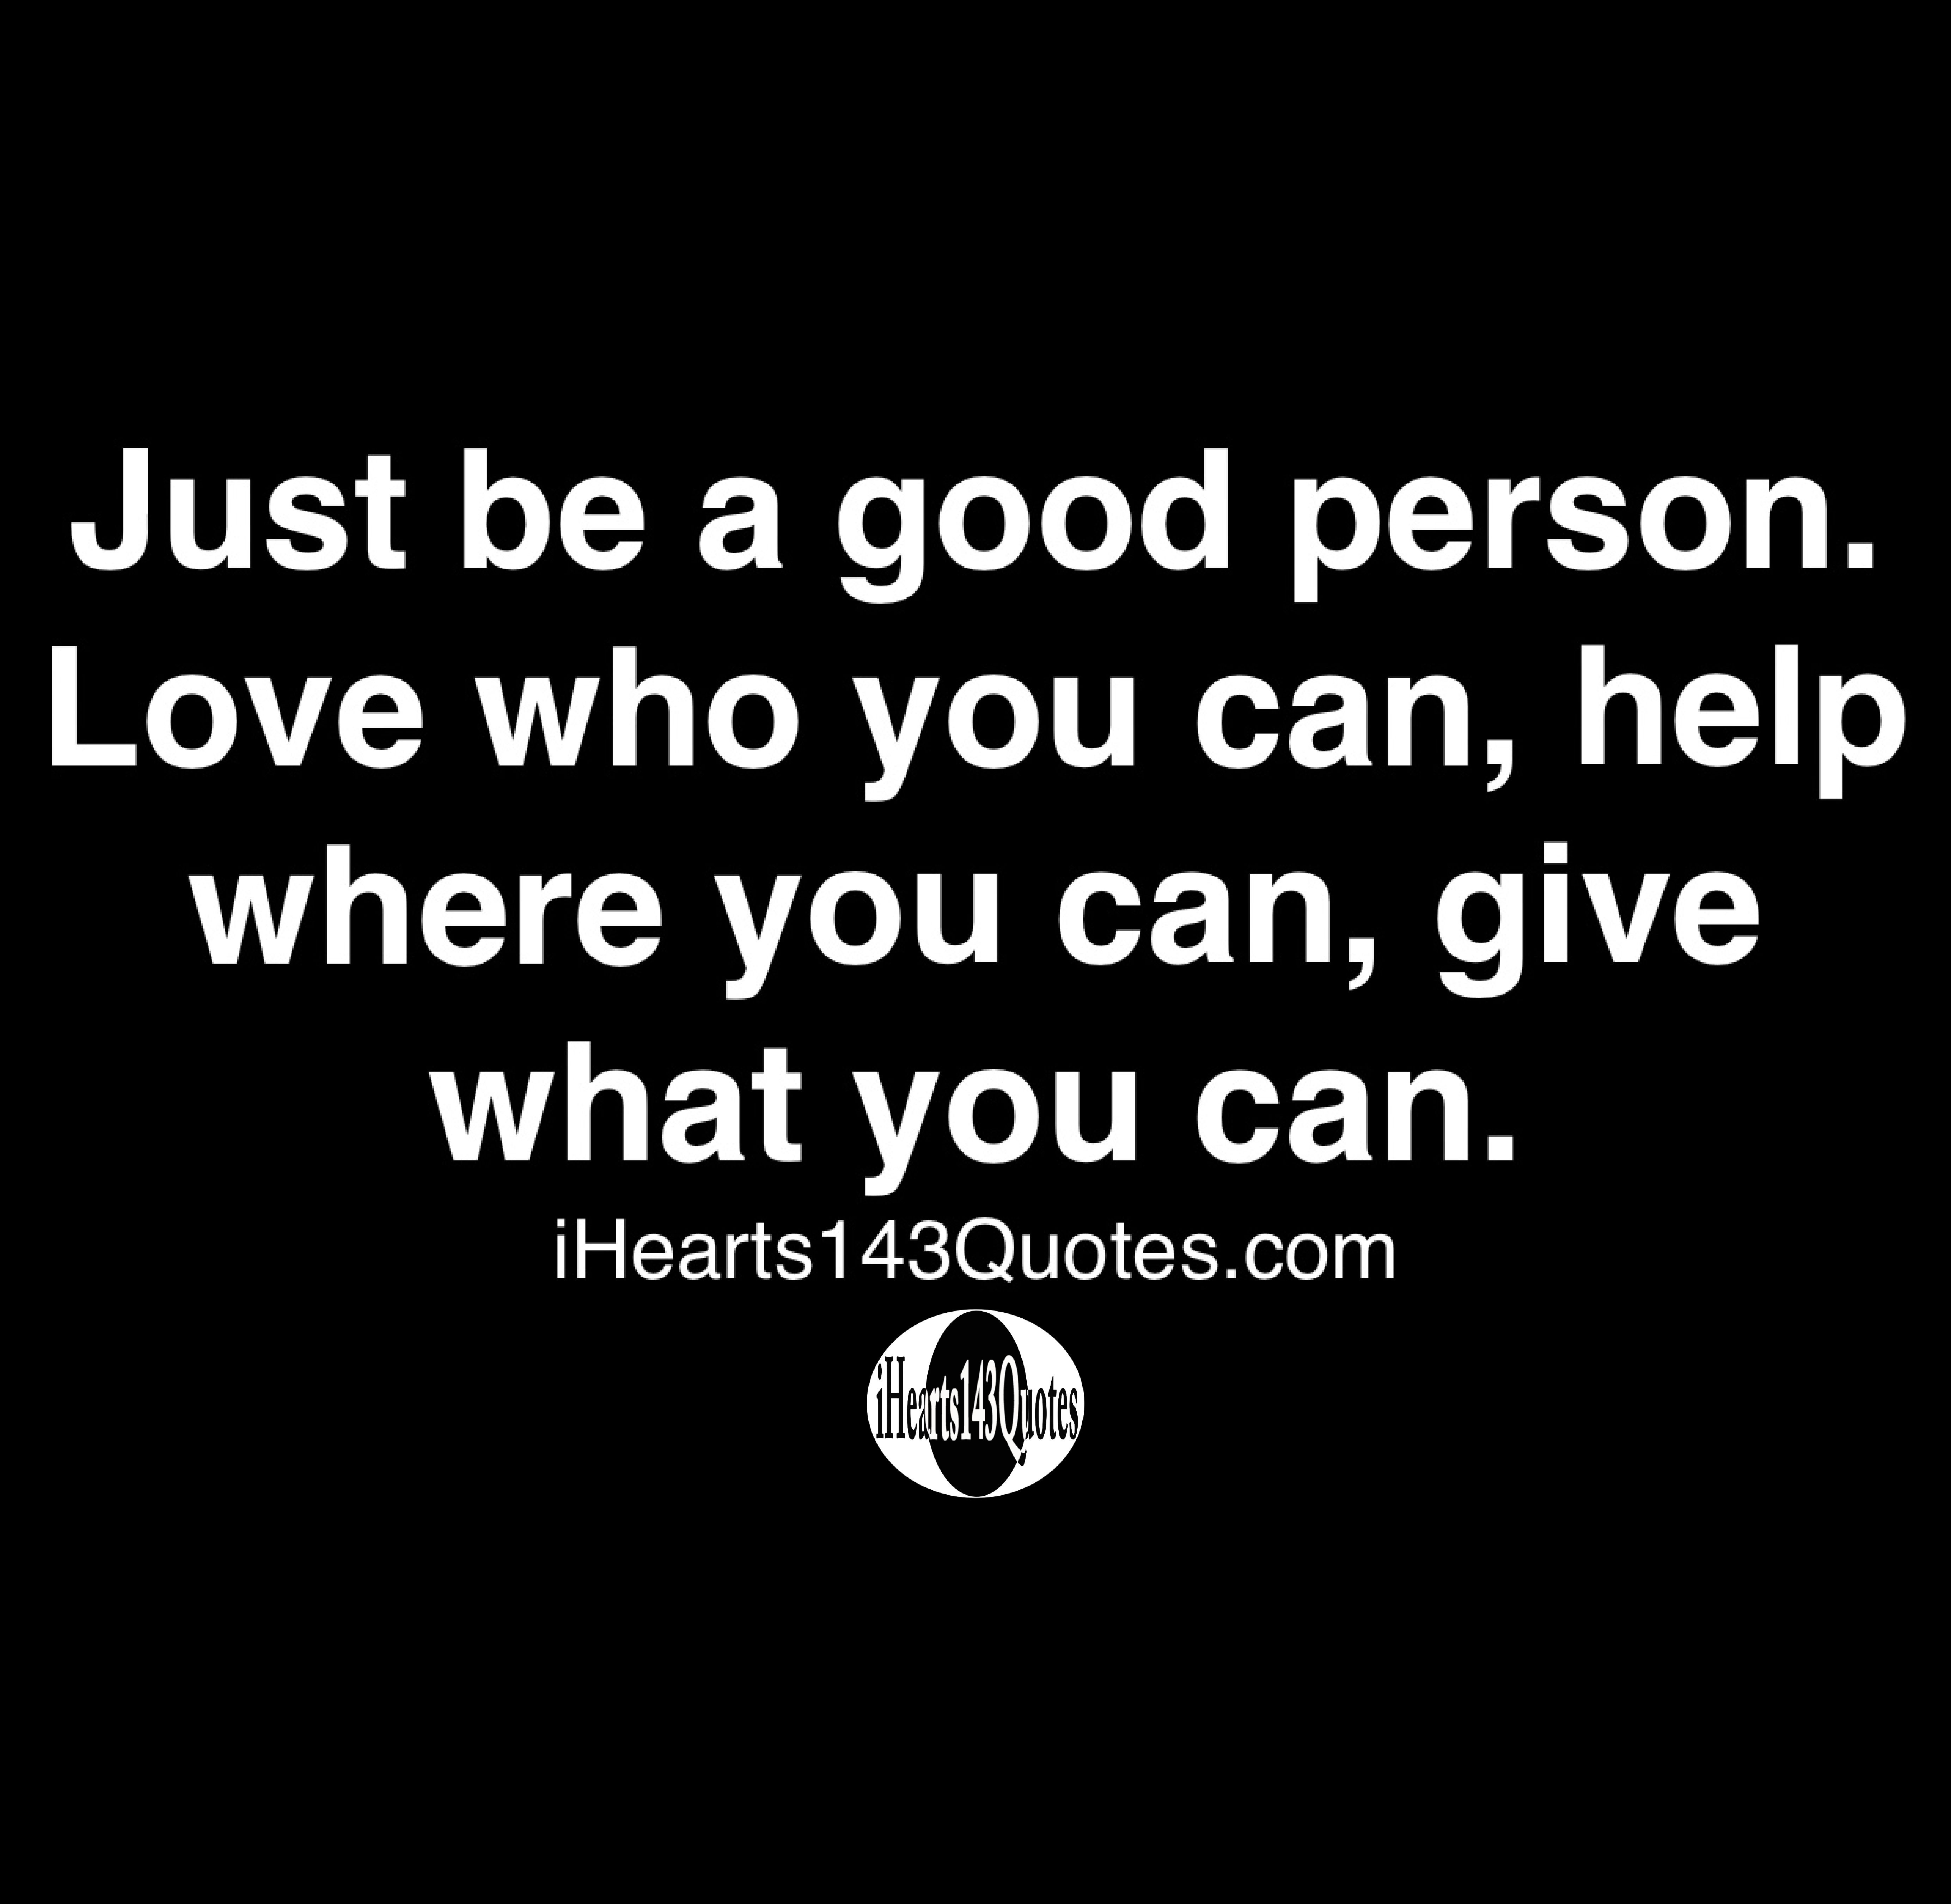 Just Be A Good Person Love Who You Can Help Where You Can Give What You Can Quotes Ihearts143quotes